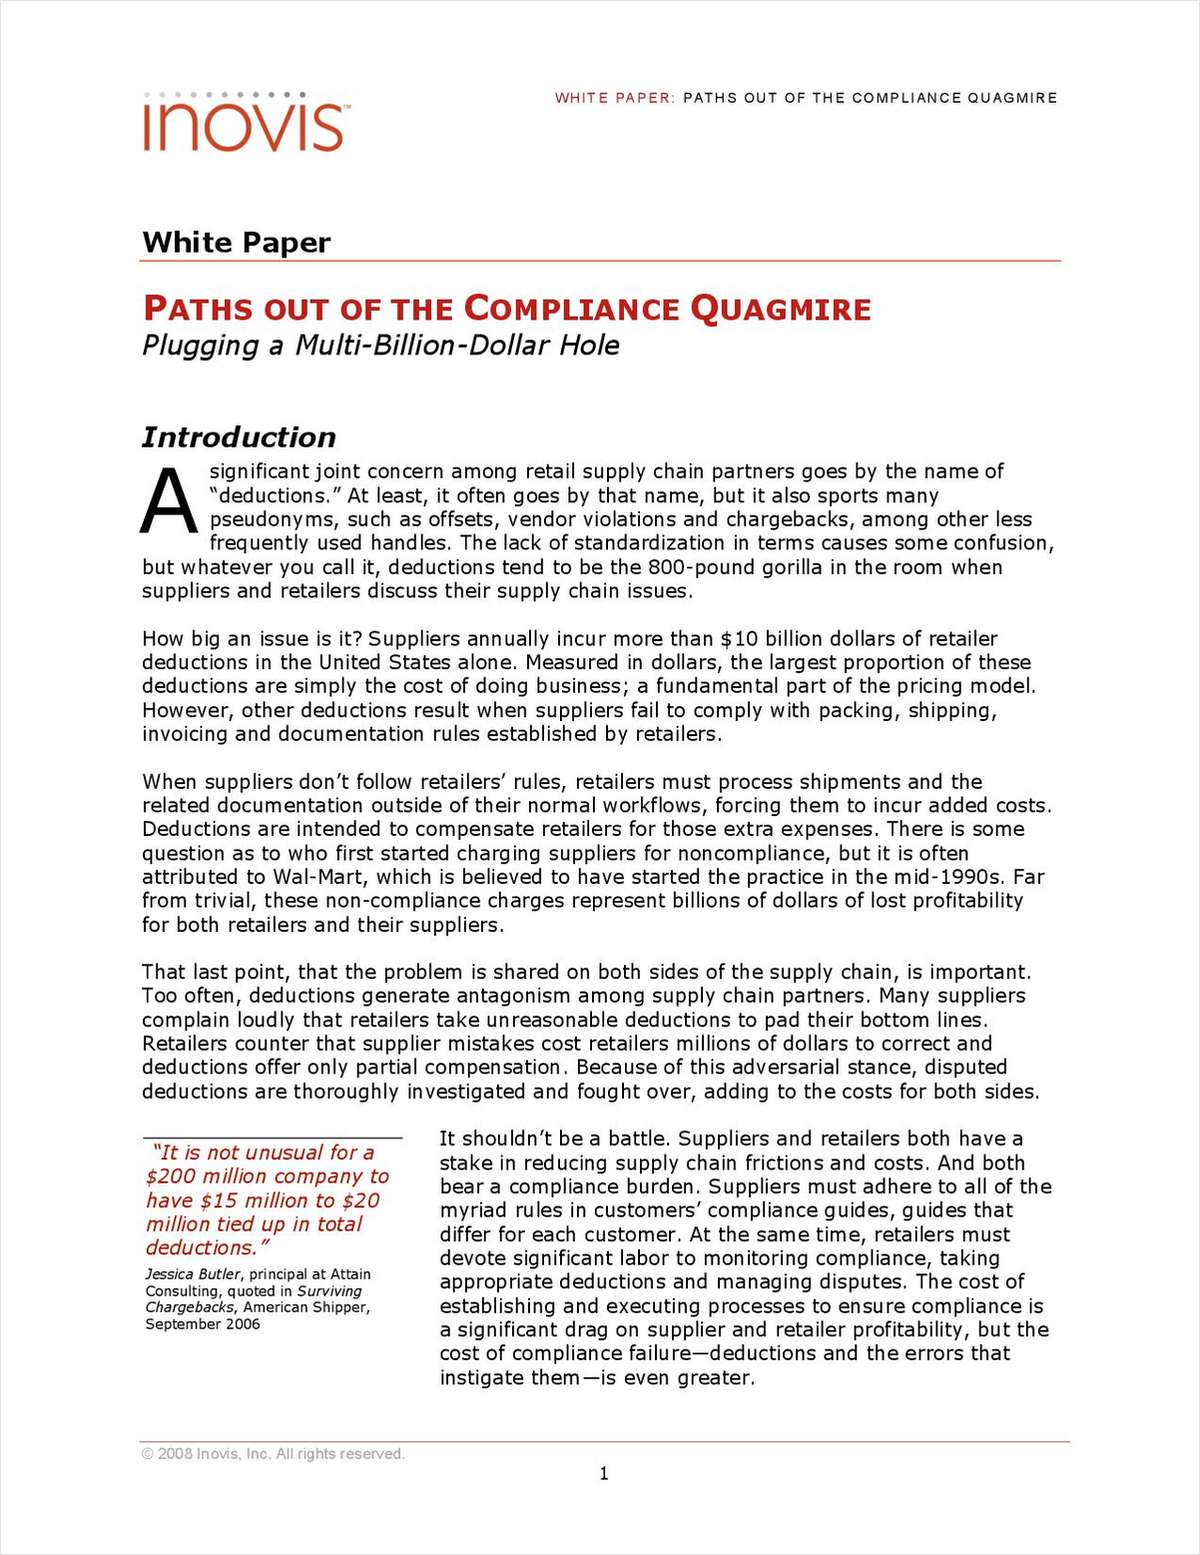 Paths out of the Compliance Quagmire: Plugging a Multi-Billion-Dollar Hole